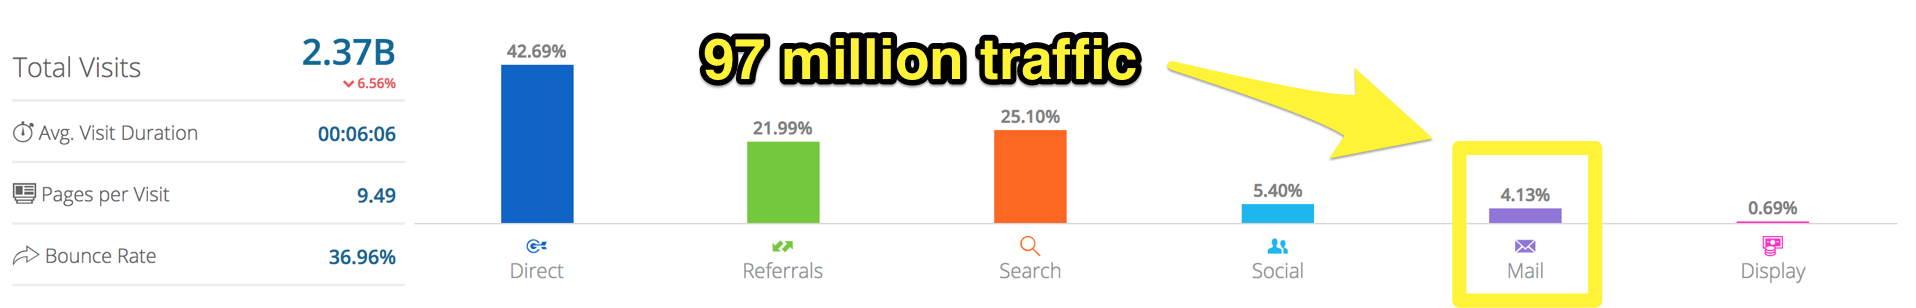 Screenshot showing a graph on the sources of traffic for amazon.com